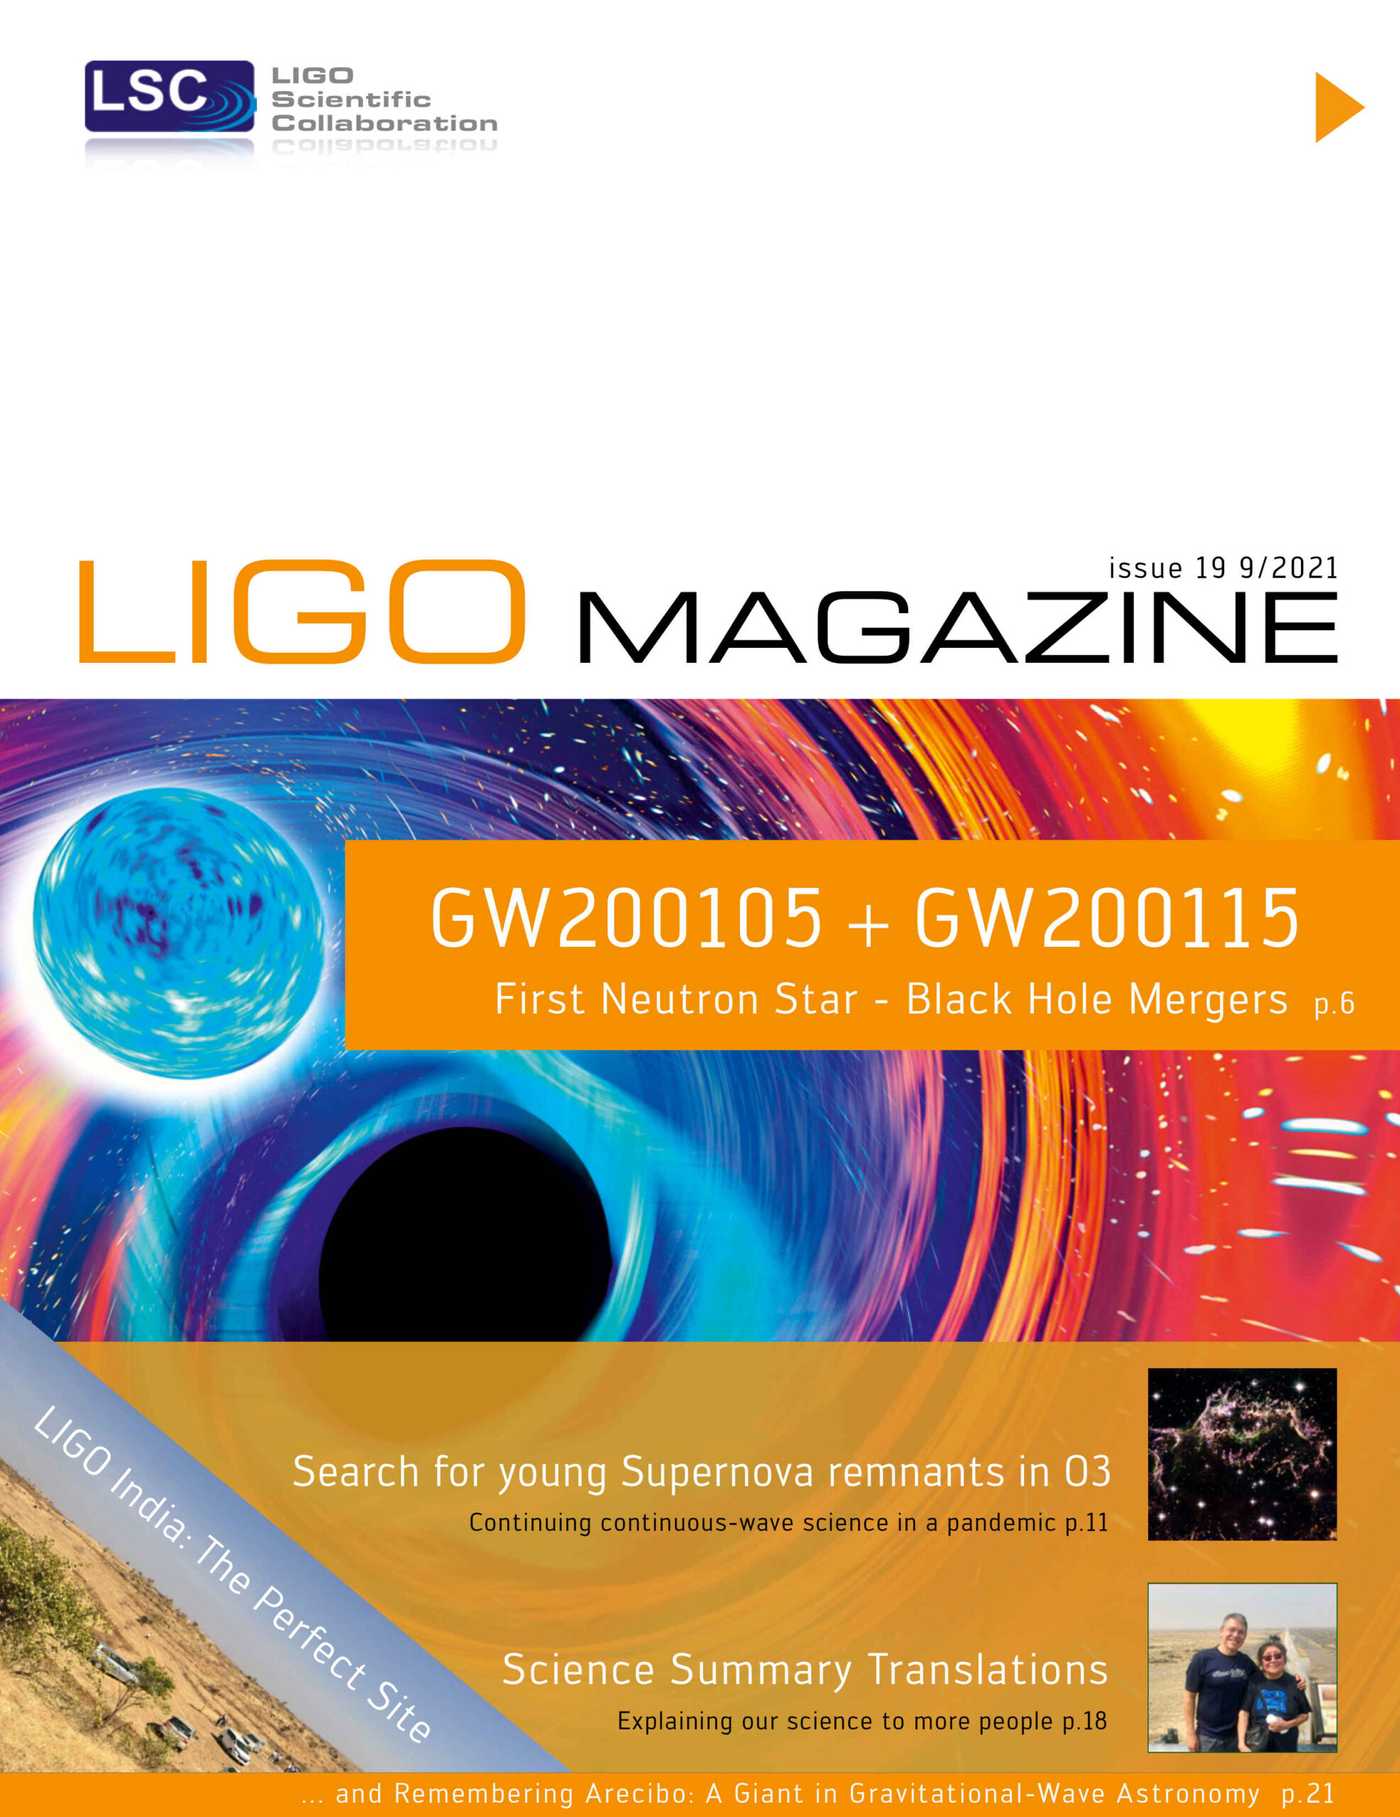 News-Image 21 of: New LIGO Magazine Issue 19 is out